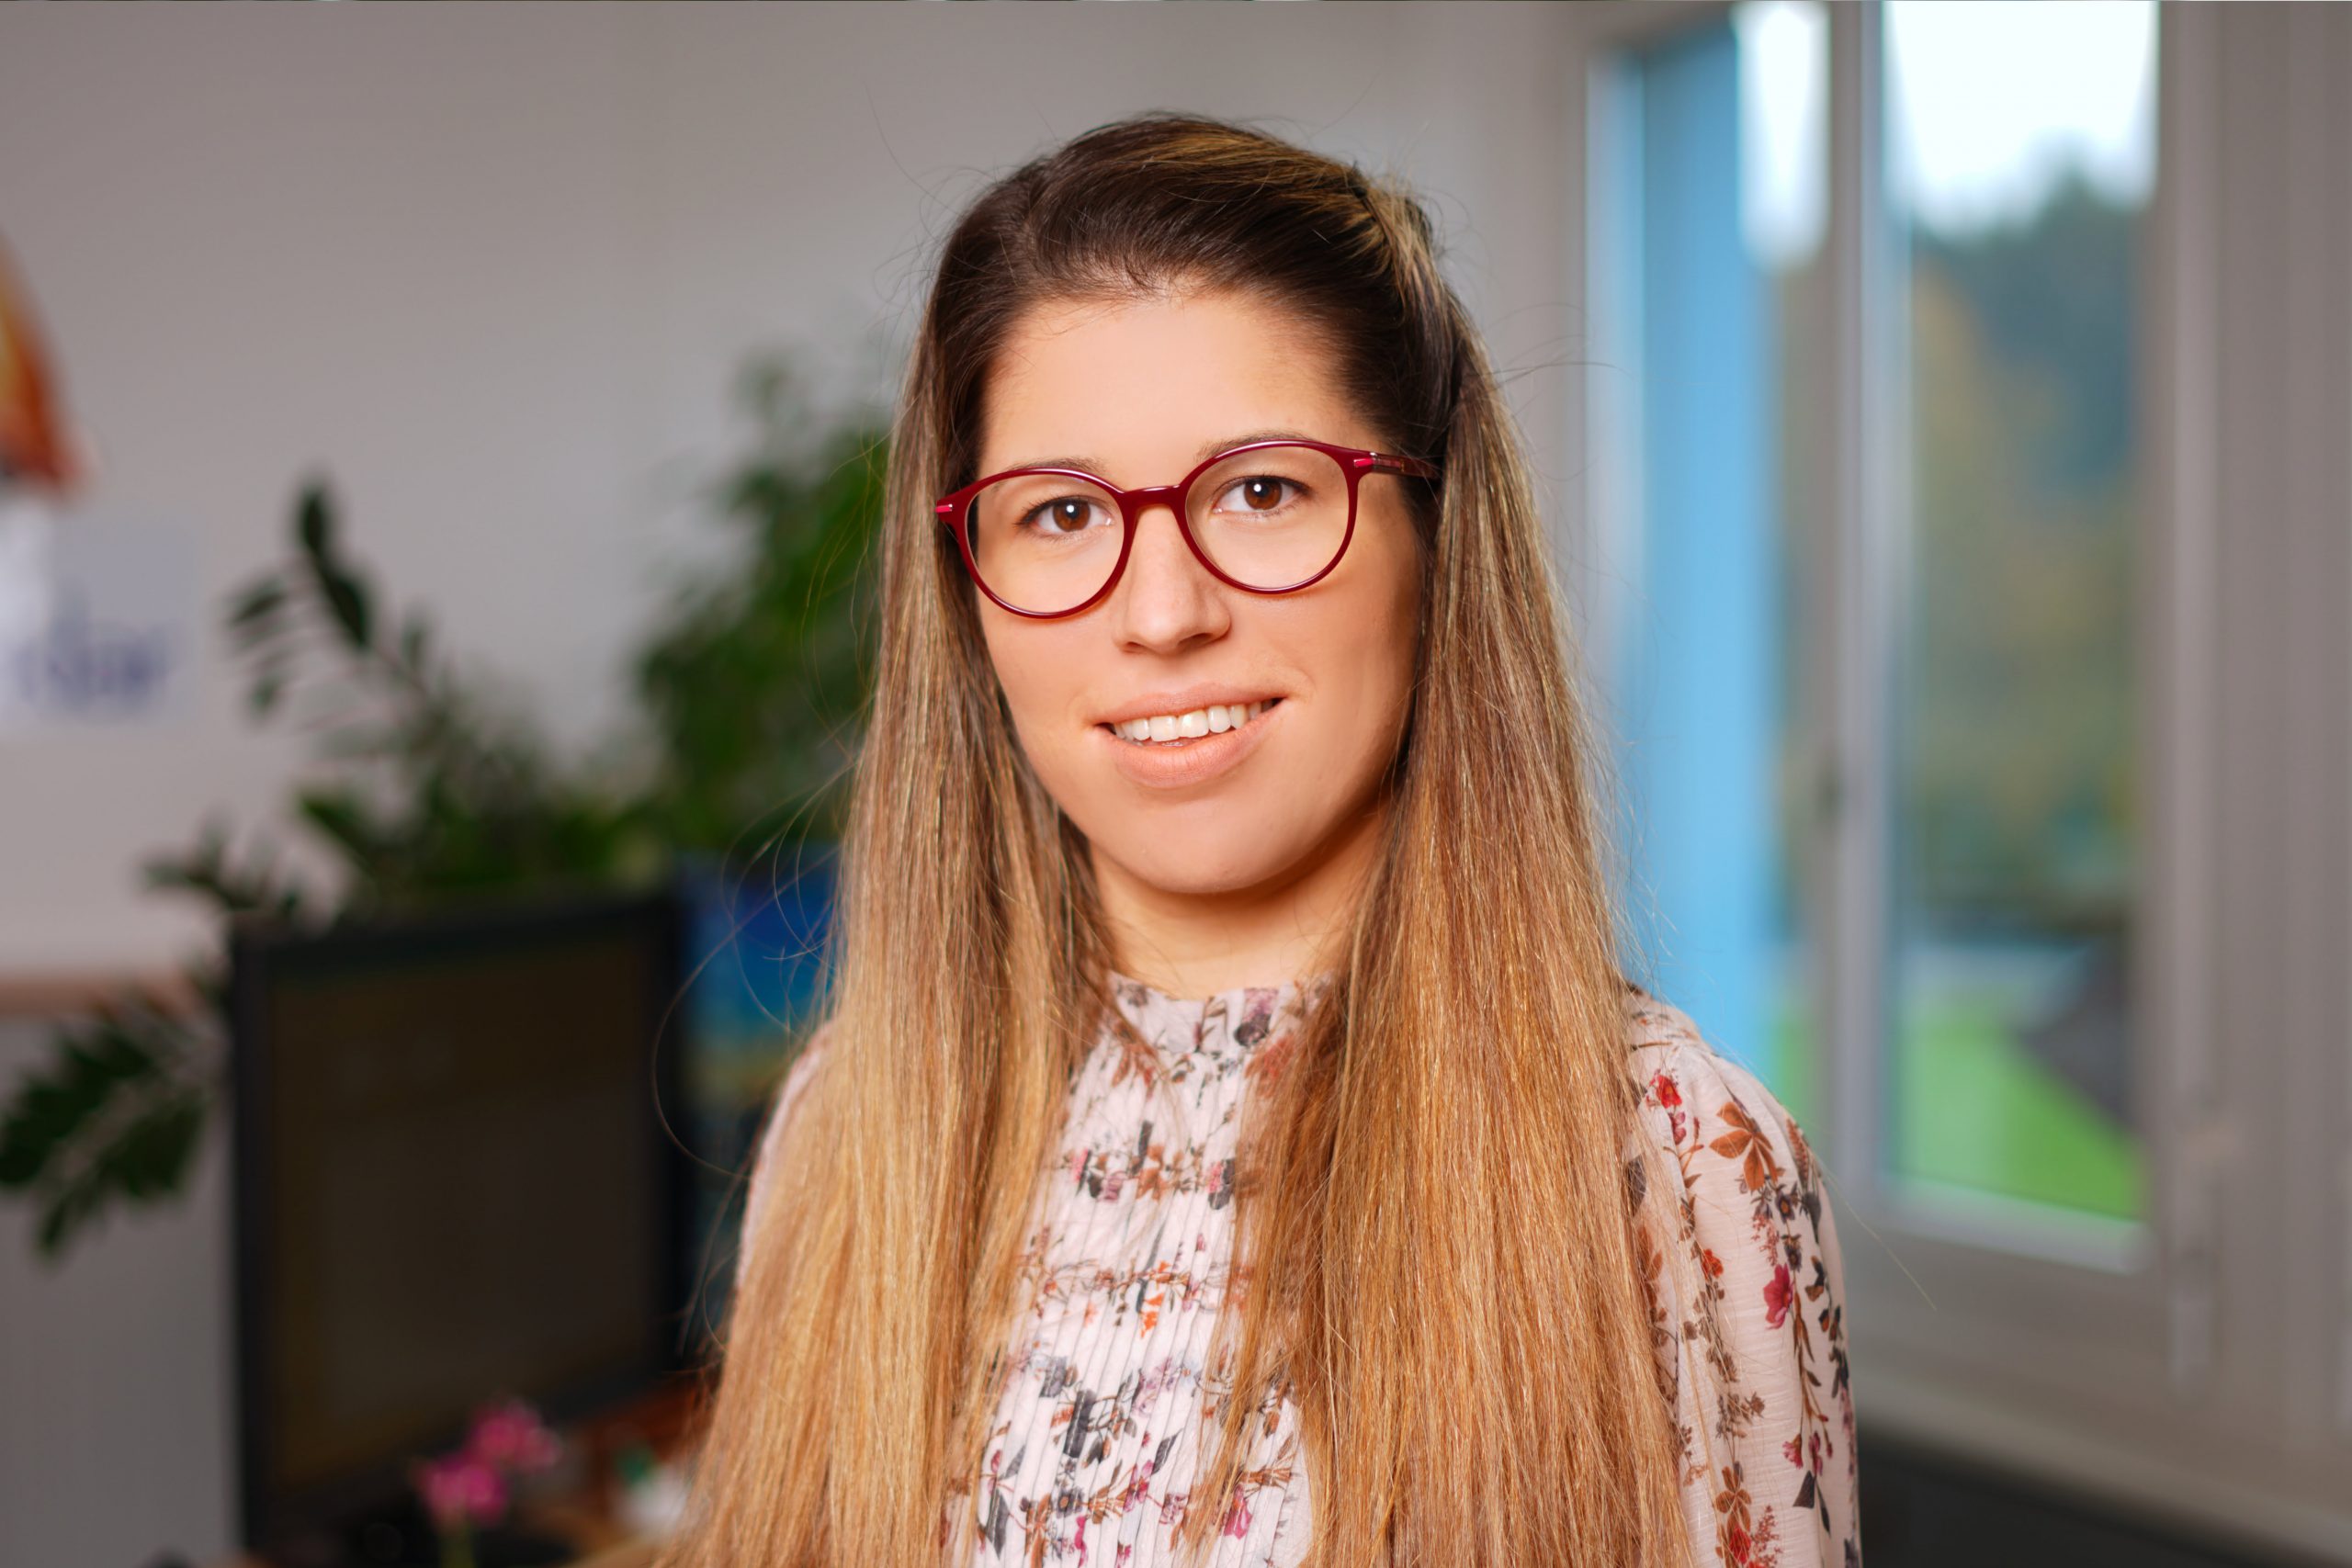 A female Kristall Klar employee with long hair and glasses